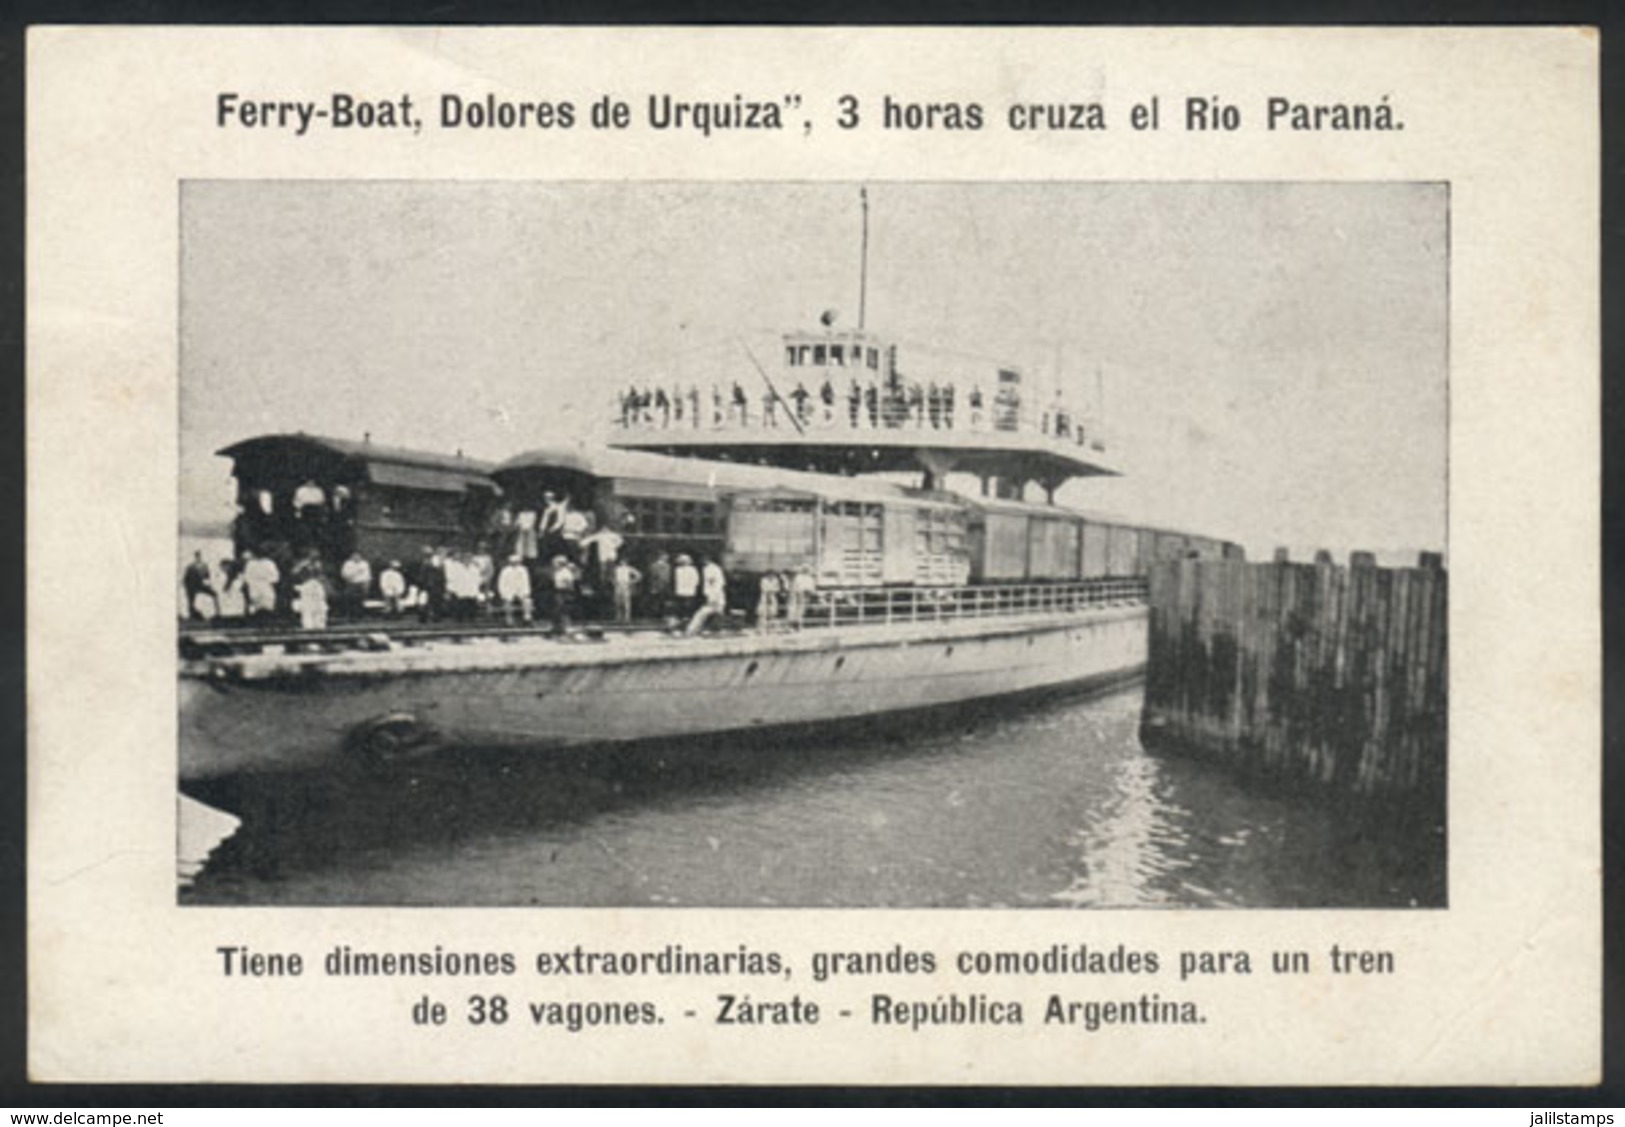 415 ARGENTINA: """FERRY-BOAT Dolores De Urquiza, Crosses The Paraná River In 3 Hours. Extraordinary Dimensions, Very Con - Argentina